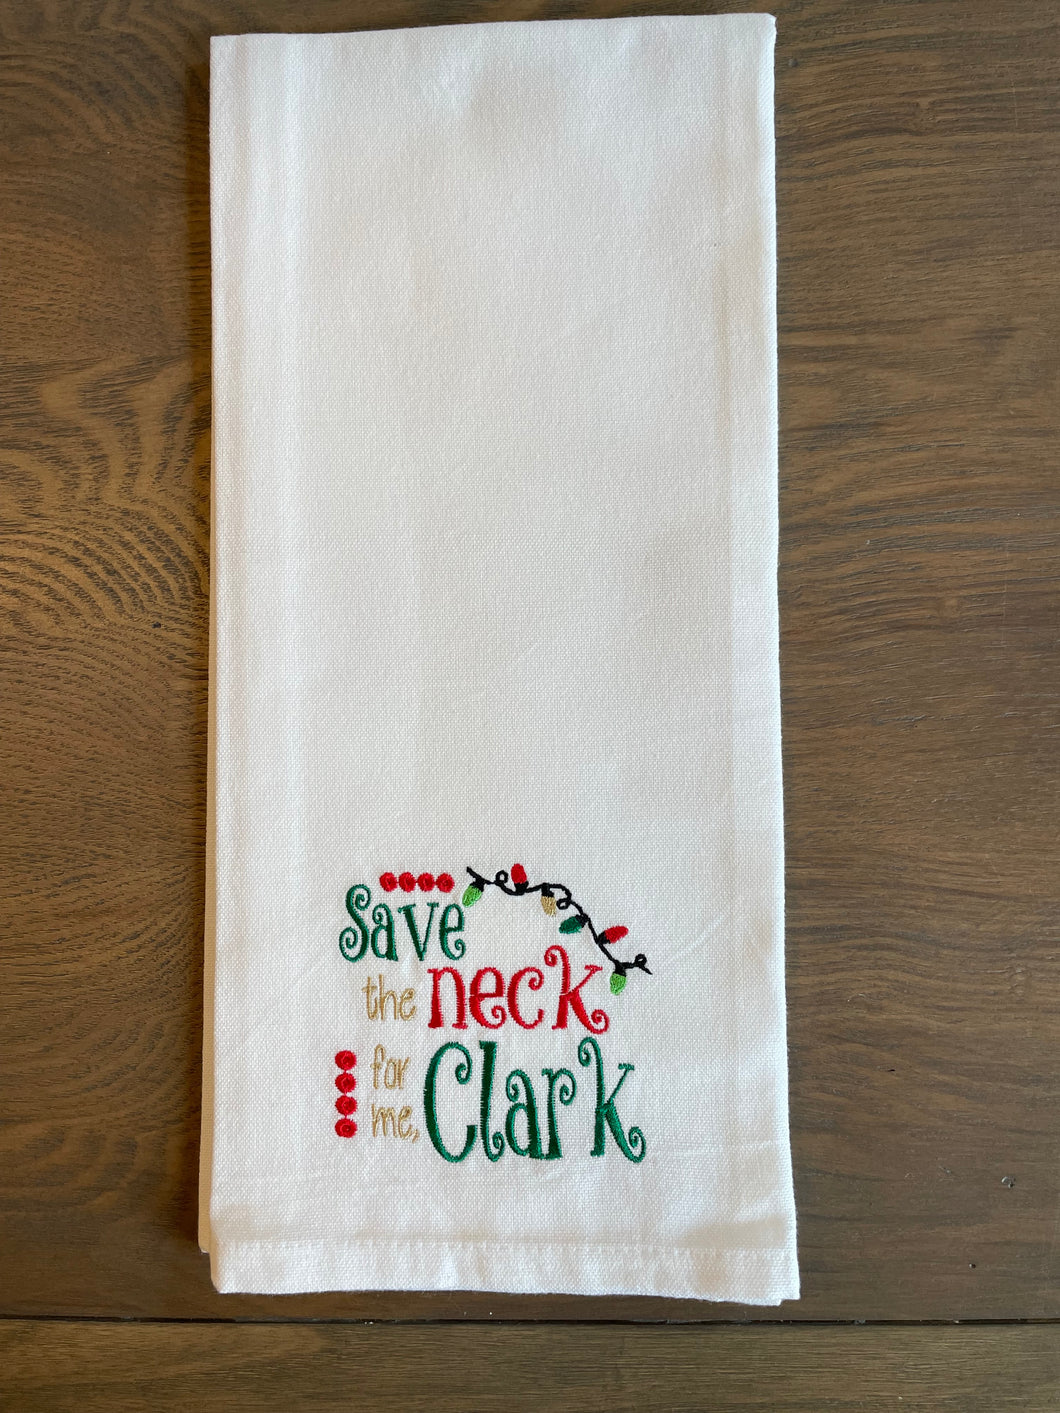 Save the neck for me, Clark Towel